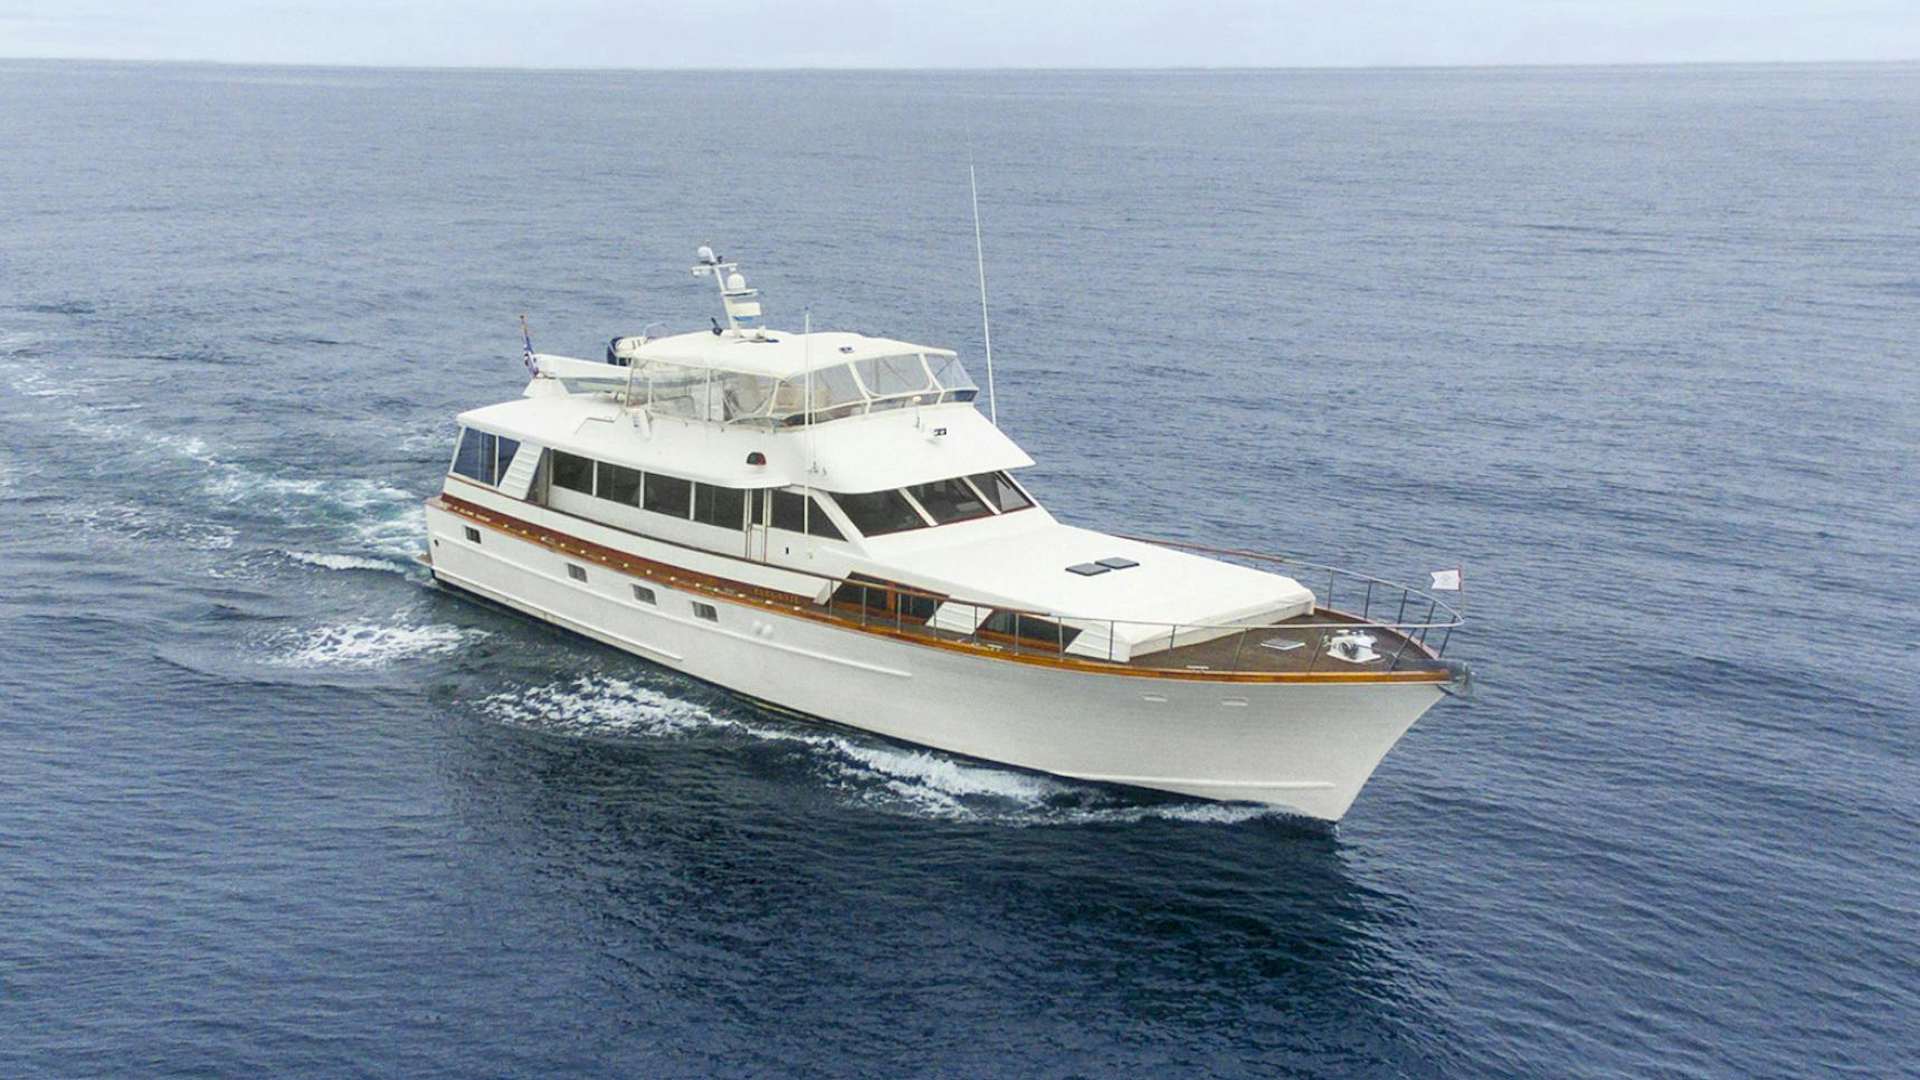 Watch Video for ELEGANTE Yacht for Sale